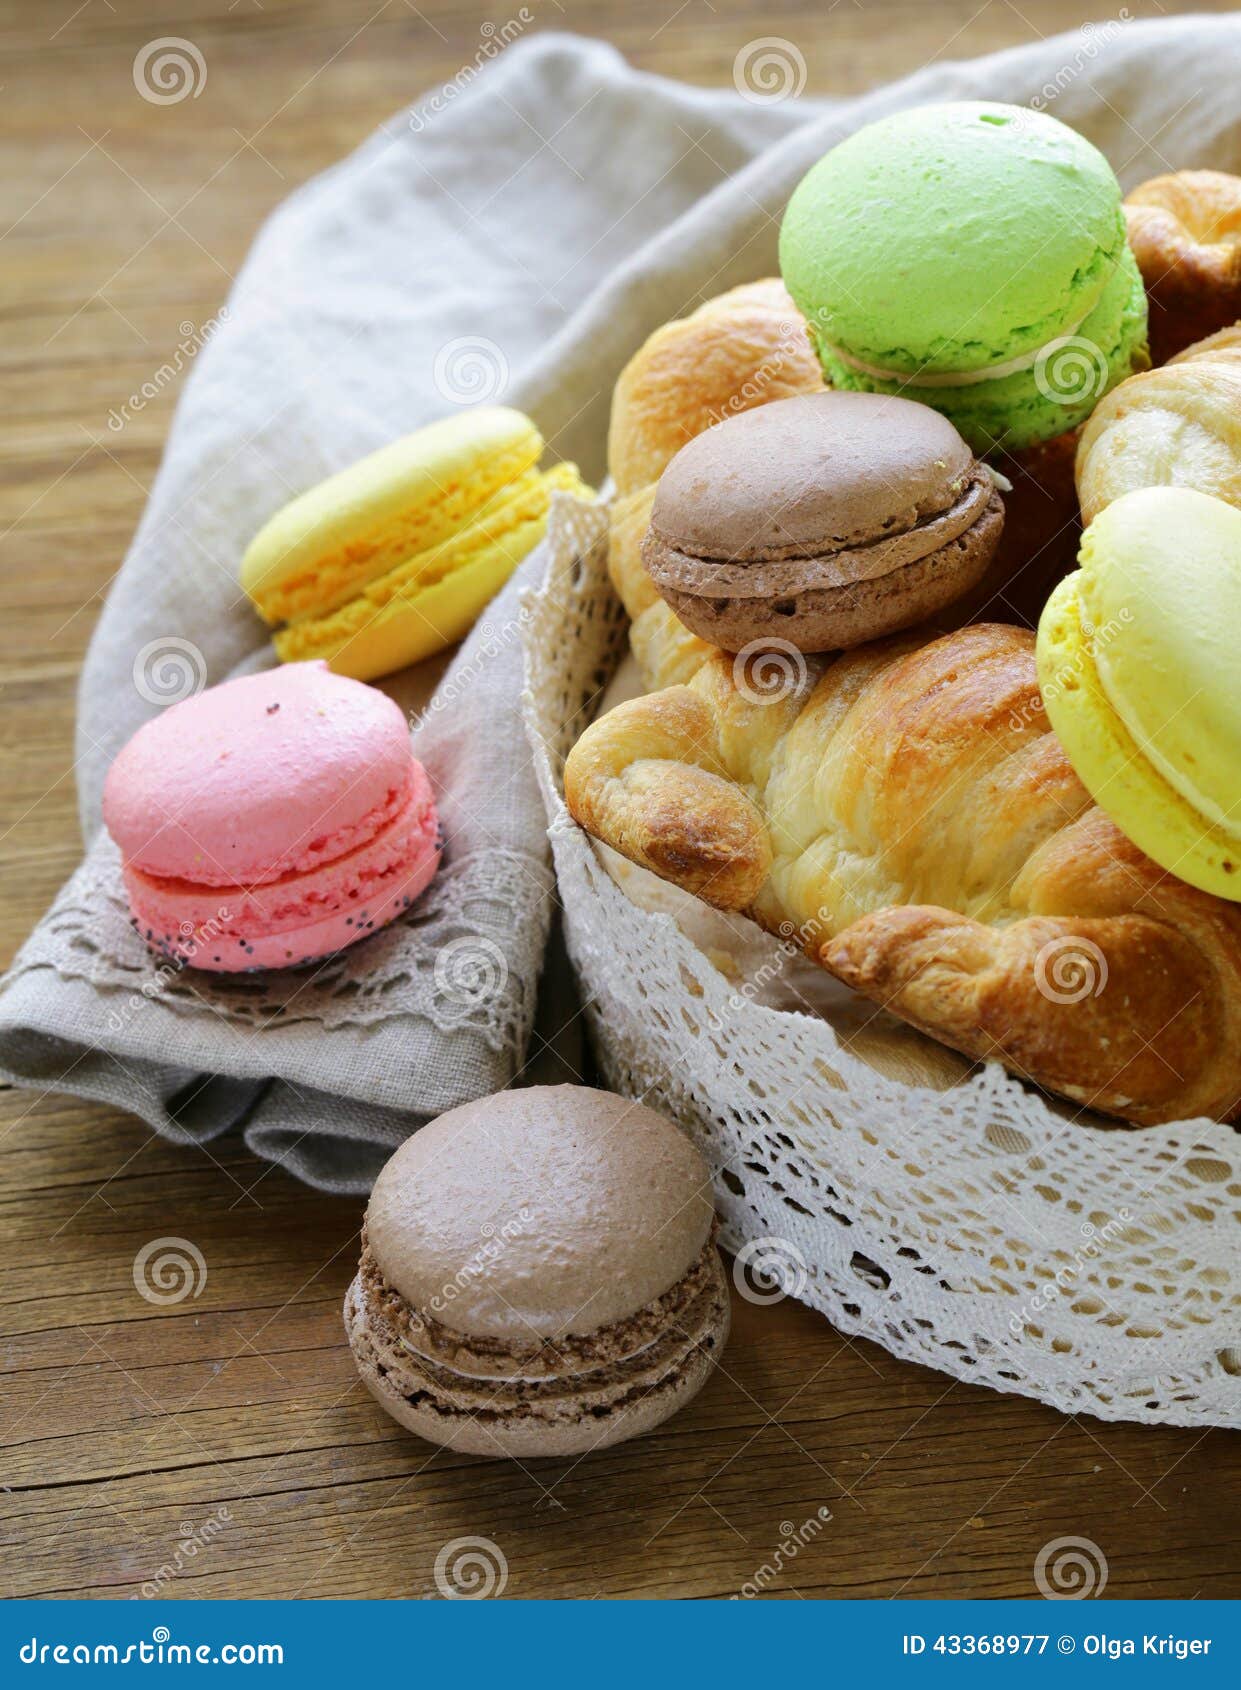 II. A Brief History of French Pastries